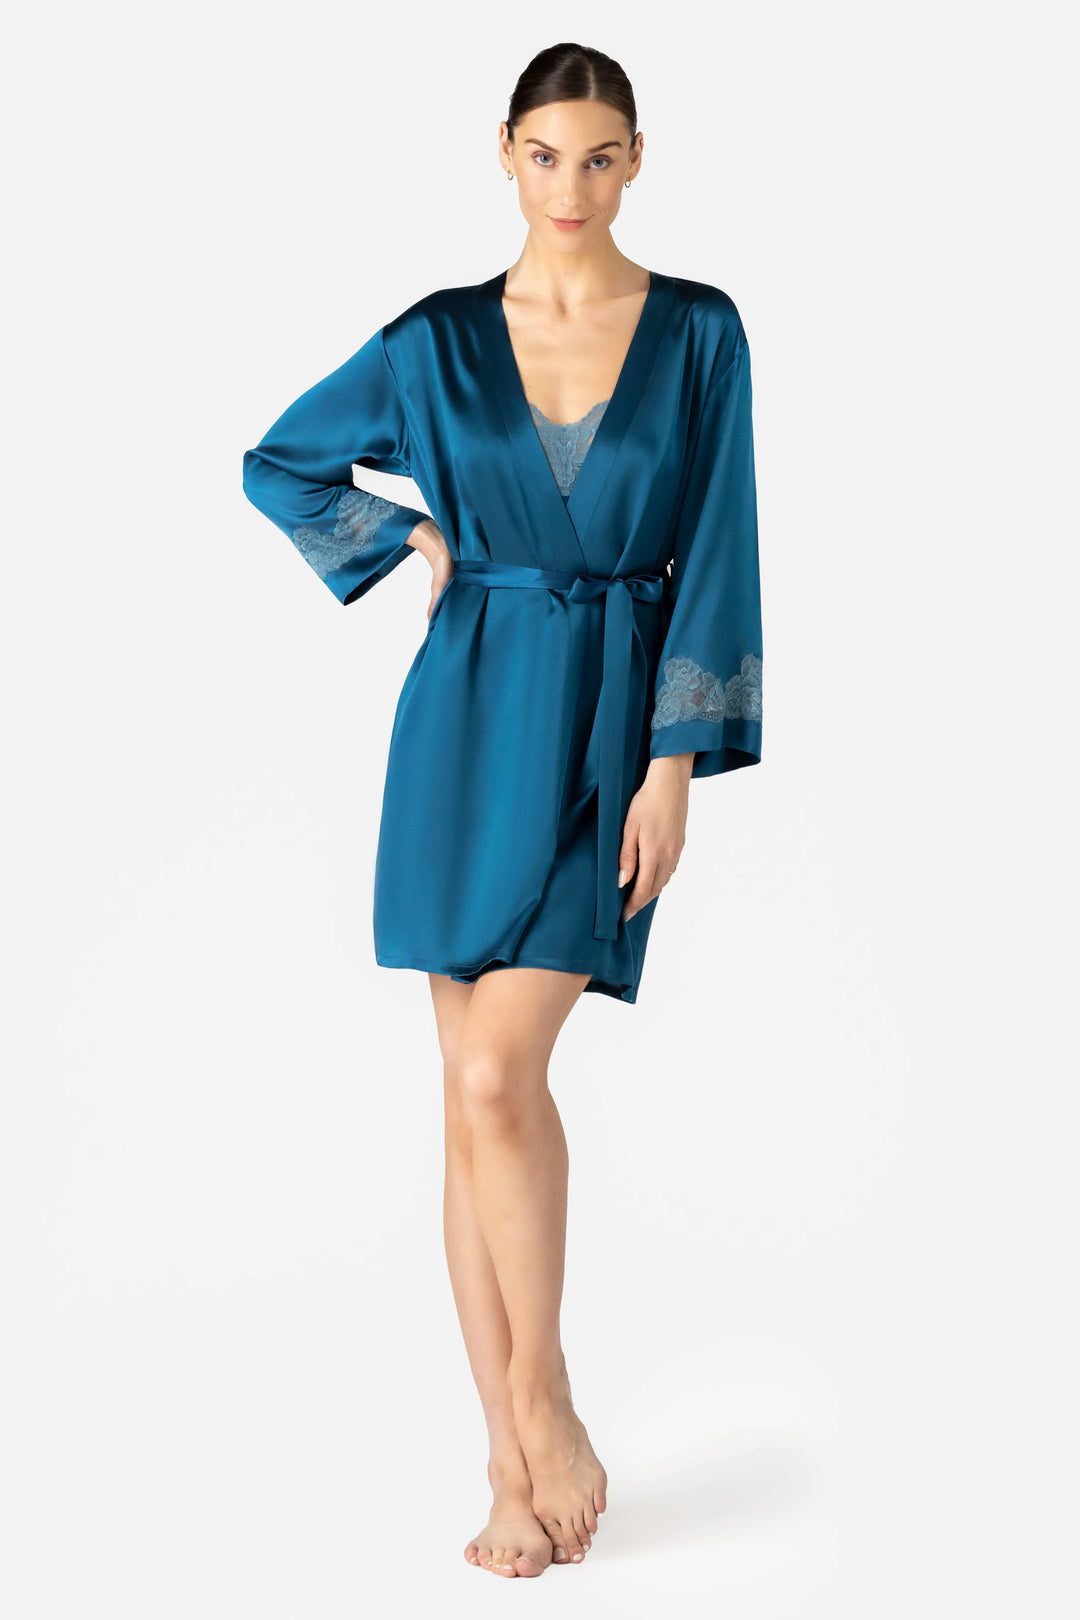 MORGAN ICONIC SHORT SILK ROBE - NEW COLORS - Expect Lace